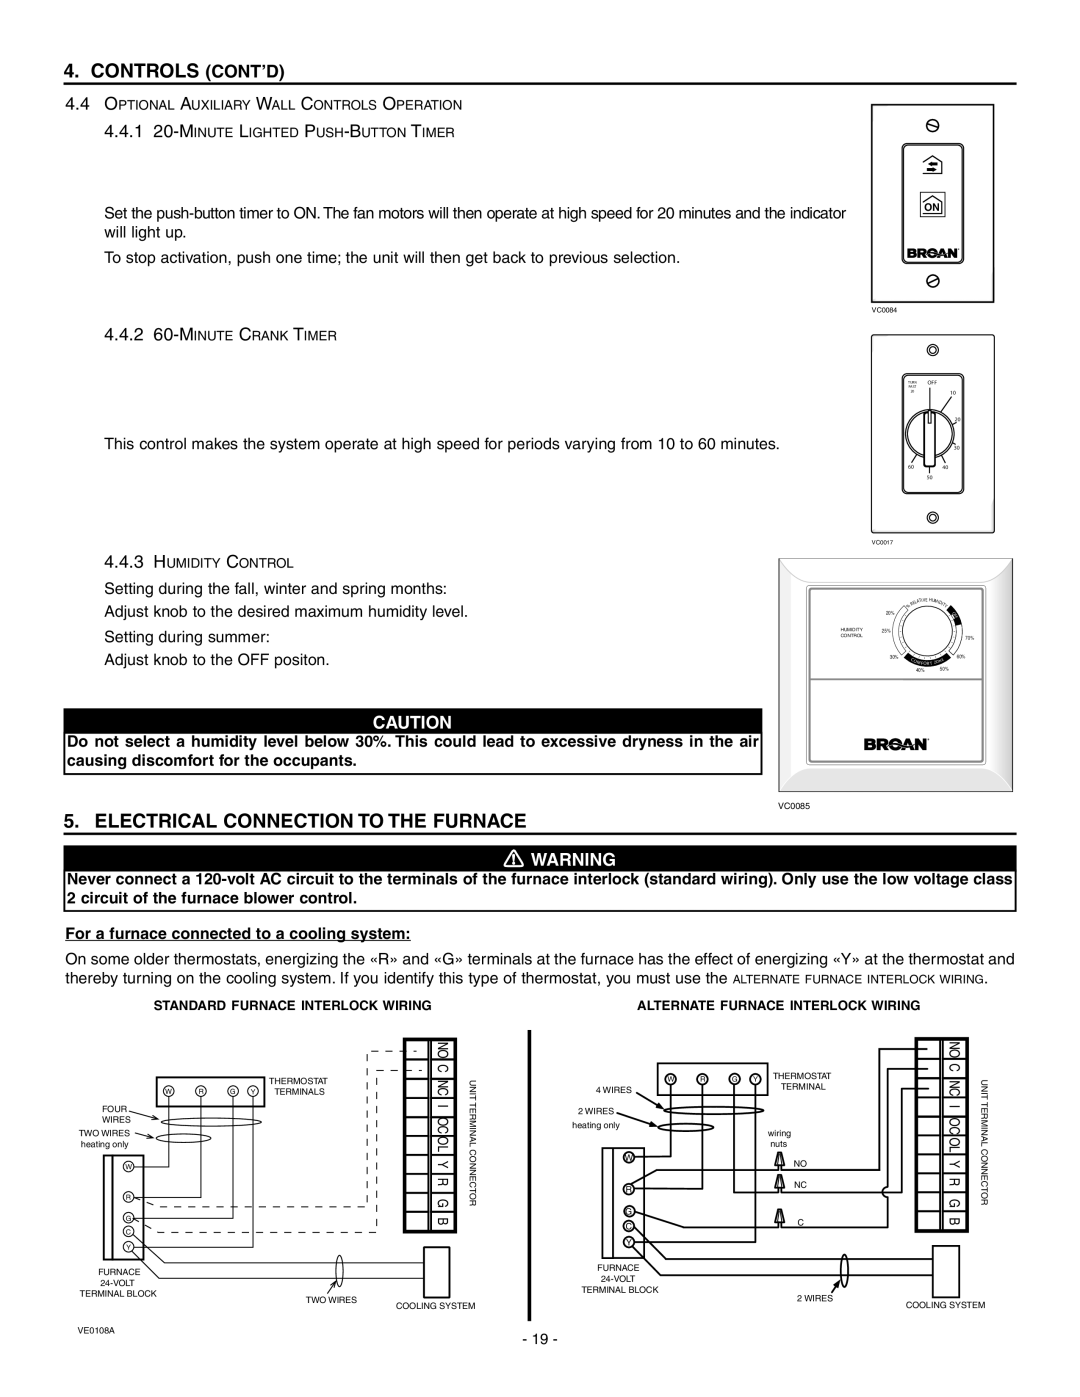 Broan ERV90HCS, HRV90HS installation instructions Controls Cont’D, Electrical Connection To The Furnace, 0 ! WARNING 